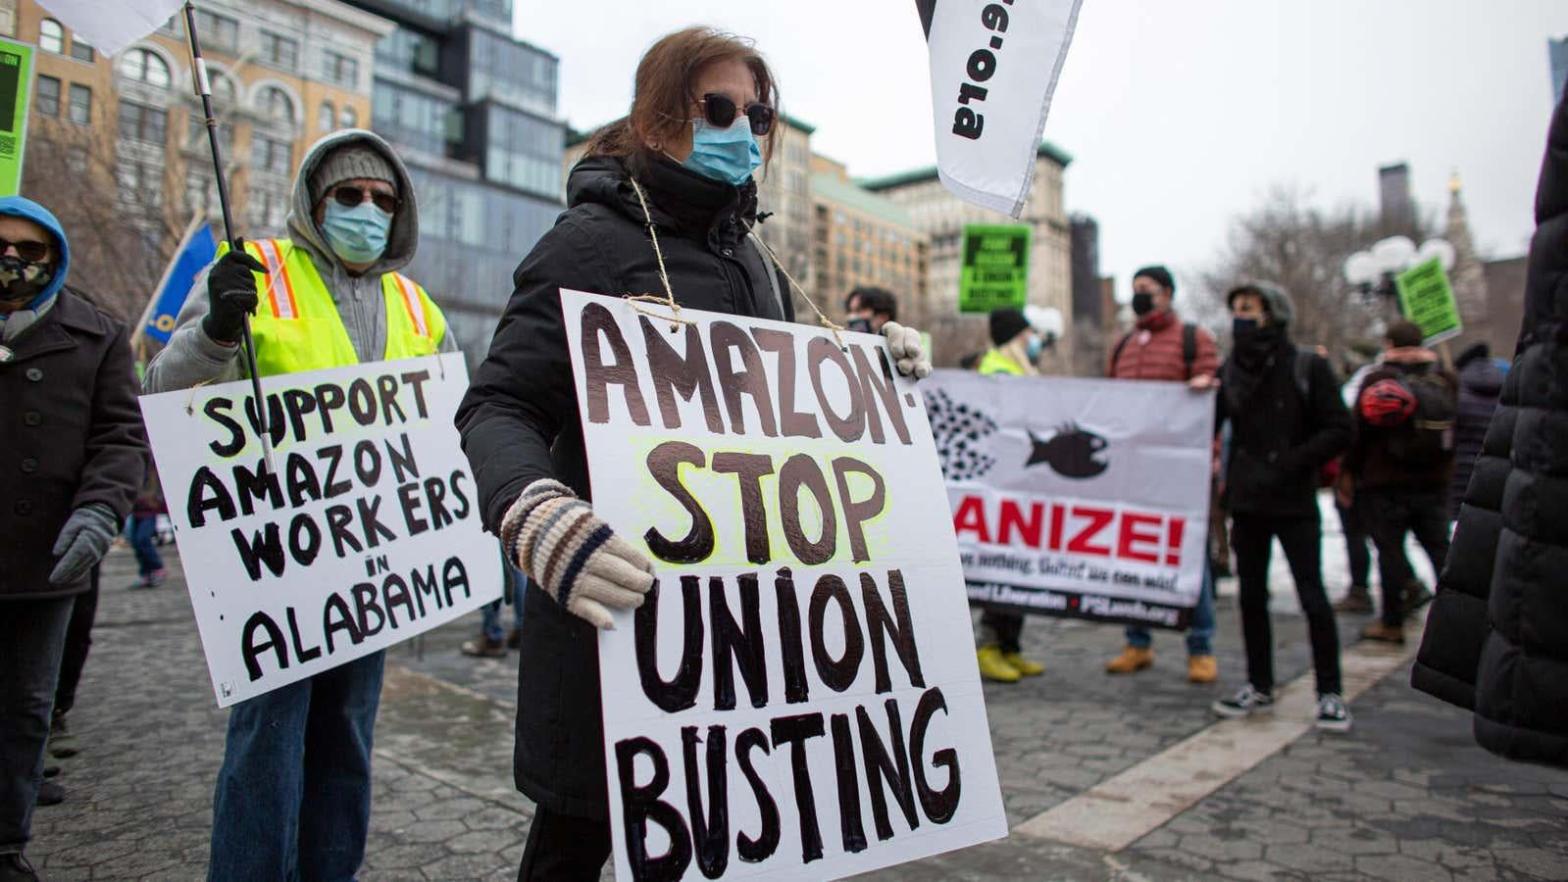 People hold placards during a protest in support of Amazon workers in Union Square, New York on February 20, 2021. (Image: Kena Bentancur, Getty Images)